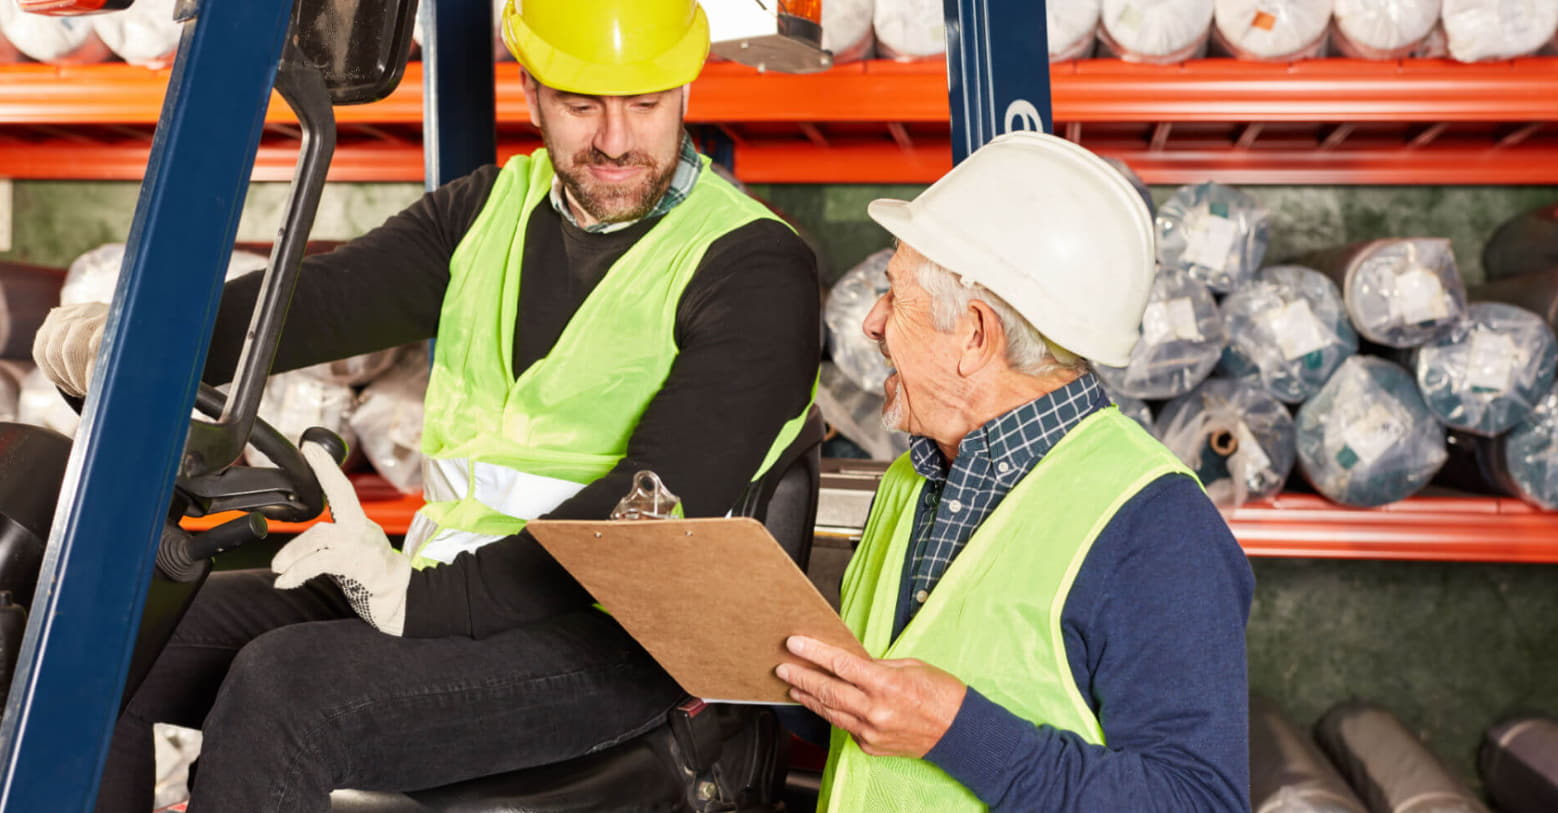 You are currently viewing Order Picker Certification: Building Skills for Efficient Warehouse Operations